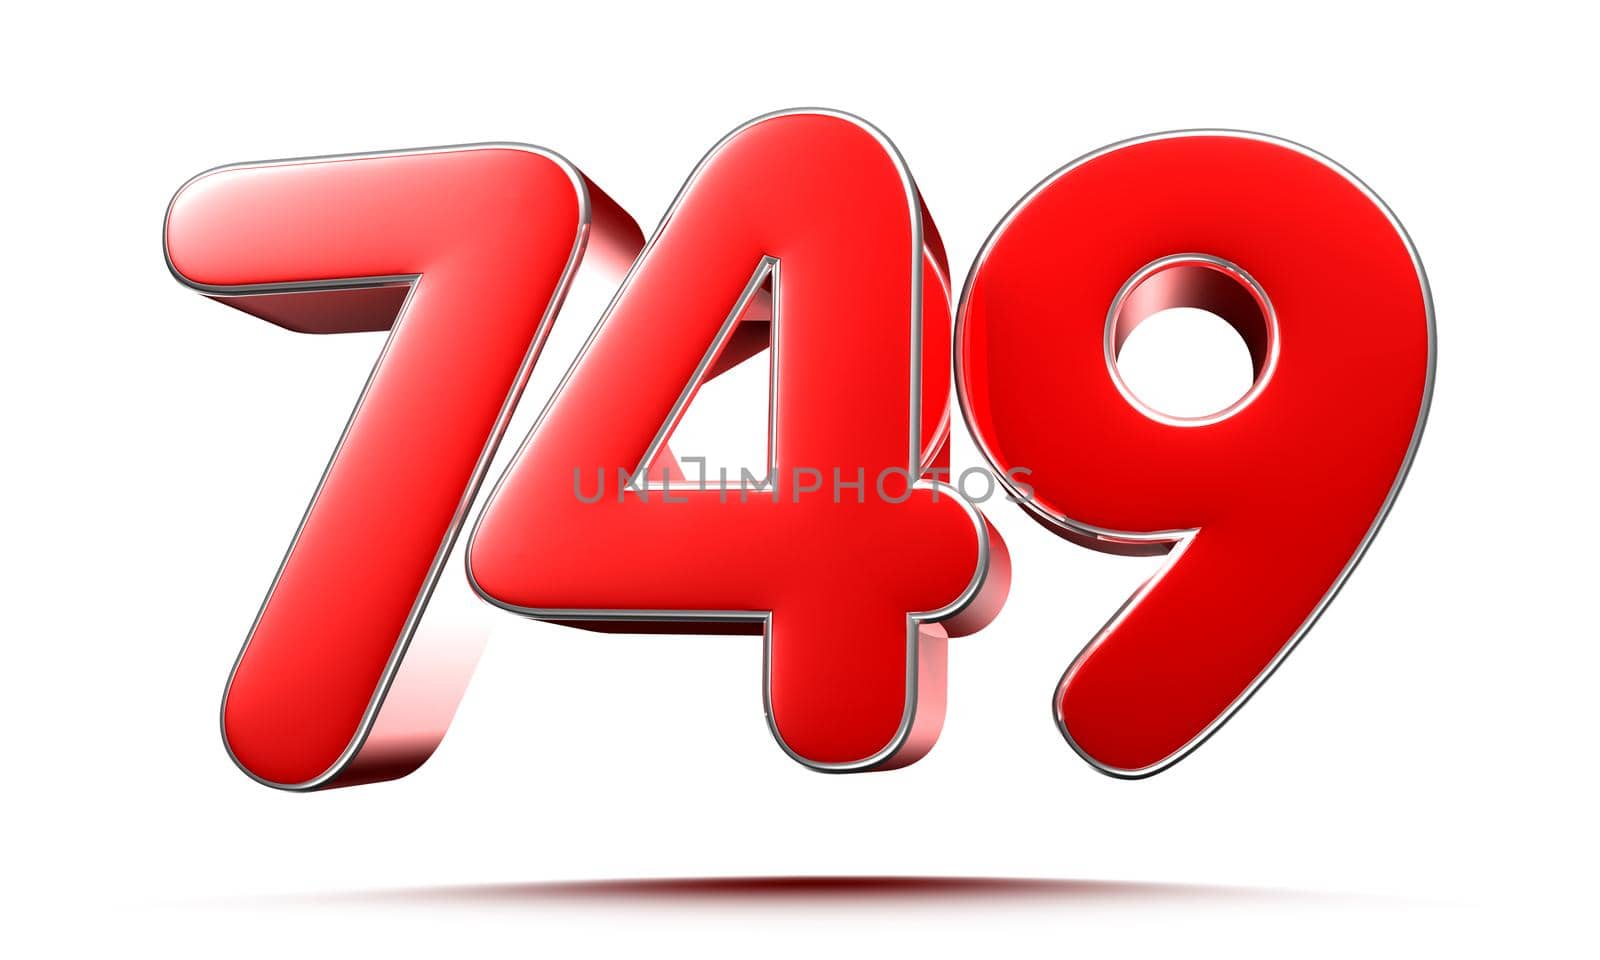 Rounded red numbers 749 on white background 3D illustration with clipping path